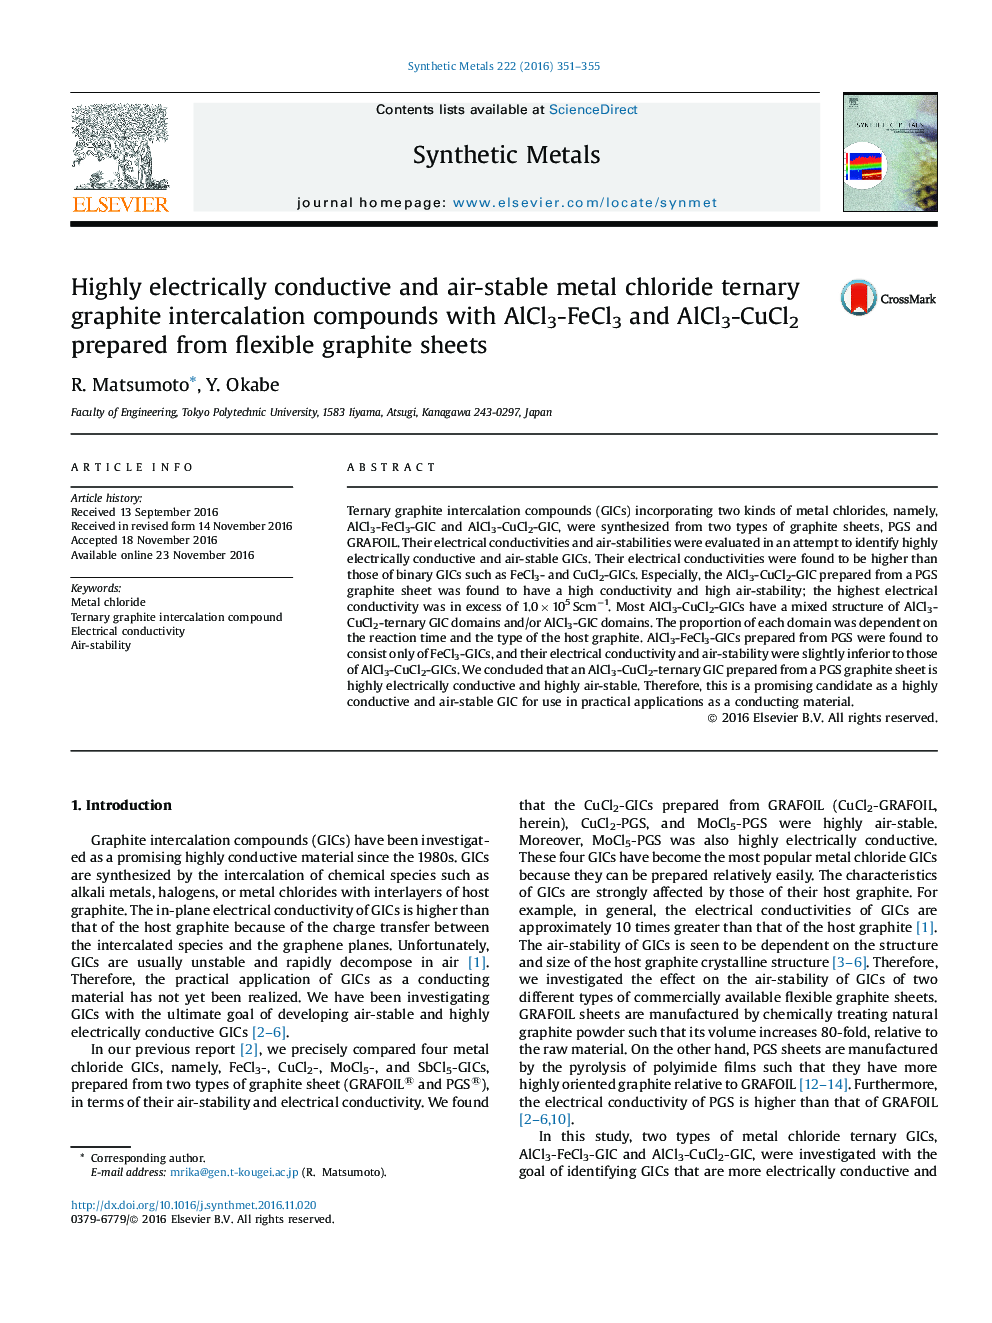 Highly electrically conductive and air-stable metal chloride ternary graphite intercalation compounds with AlCl3-FeCl3 and AlCl3-CuCl2 prepared from flexible graphite sheets